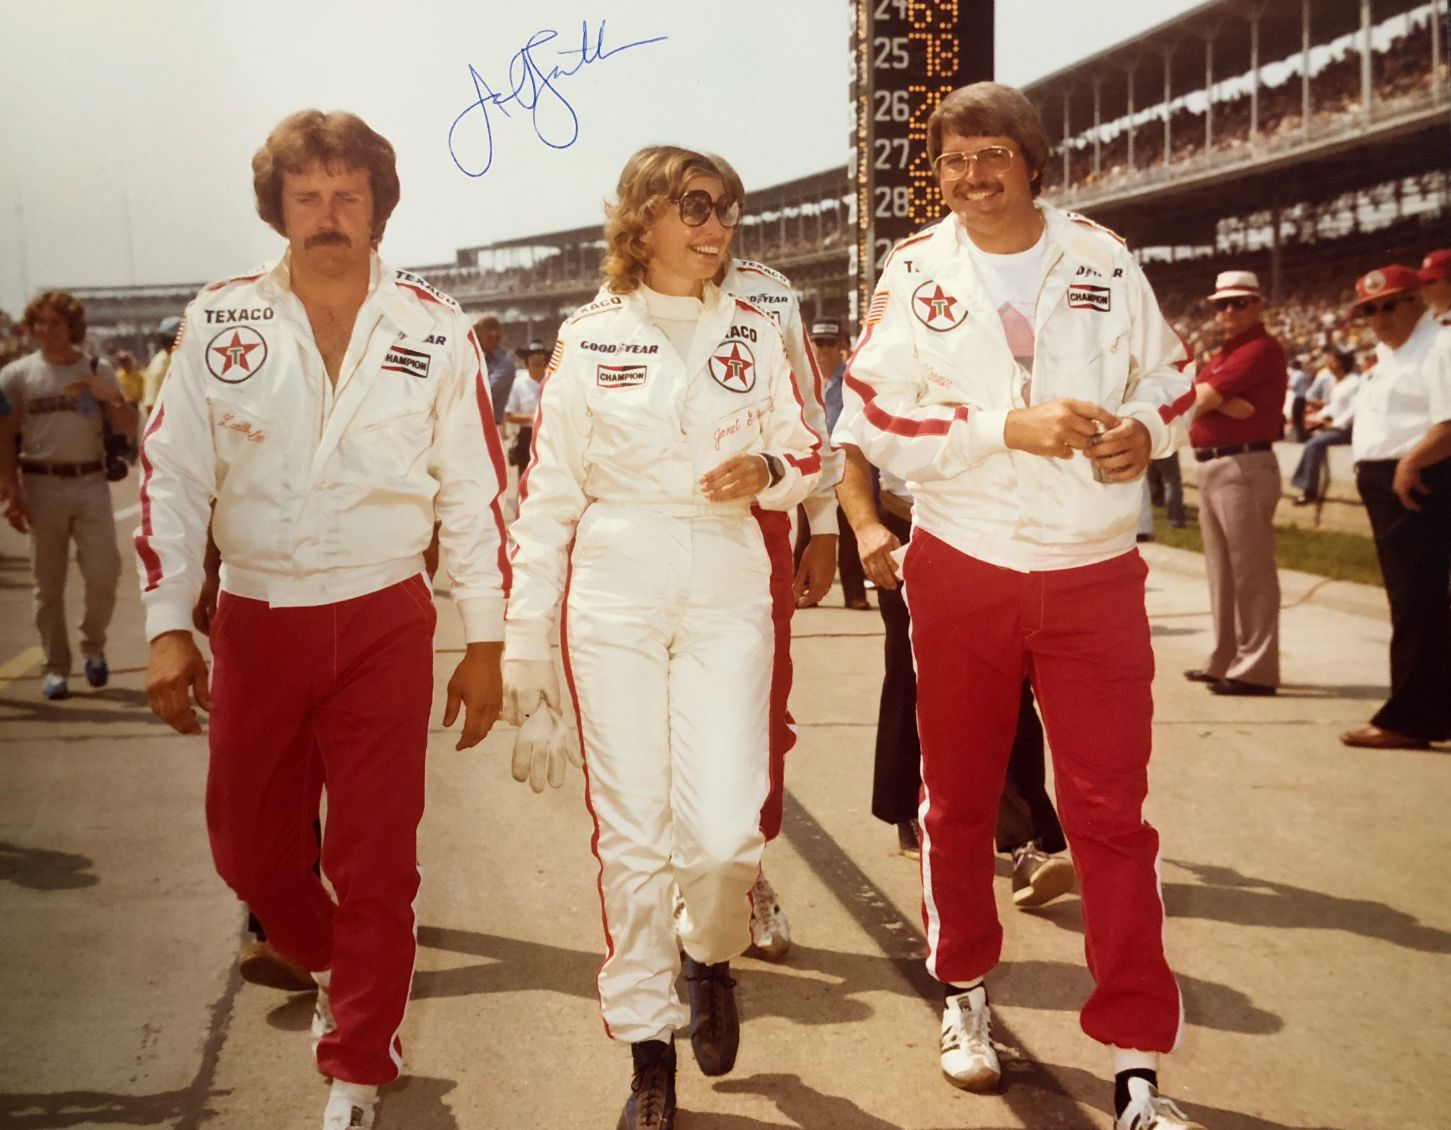 Janet Guthrie at Indianapolis. [Paul Gohde Photo]